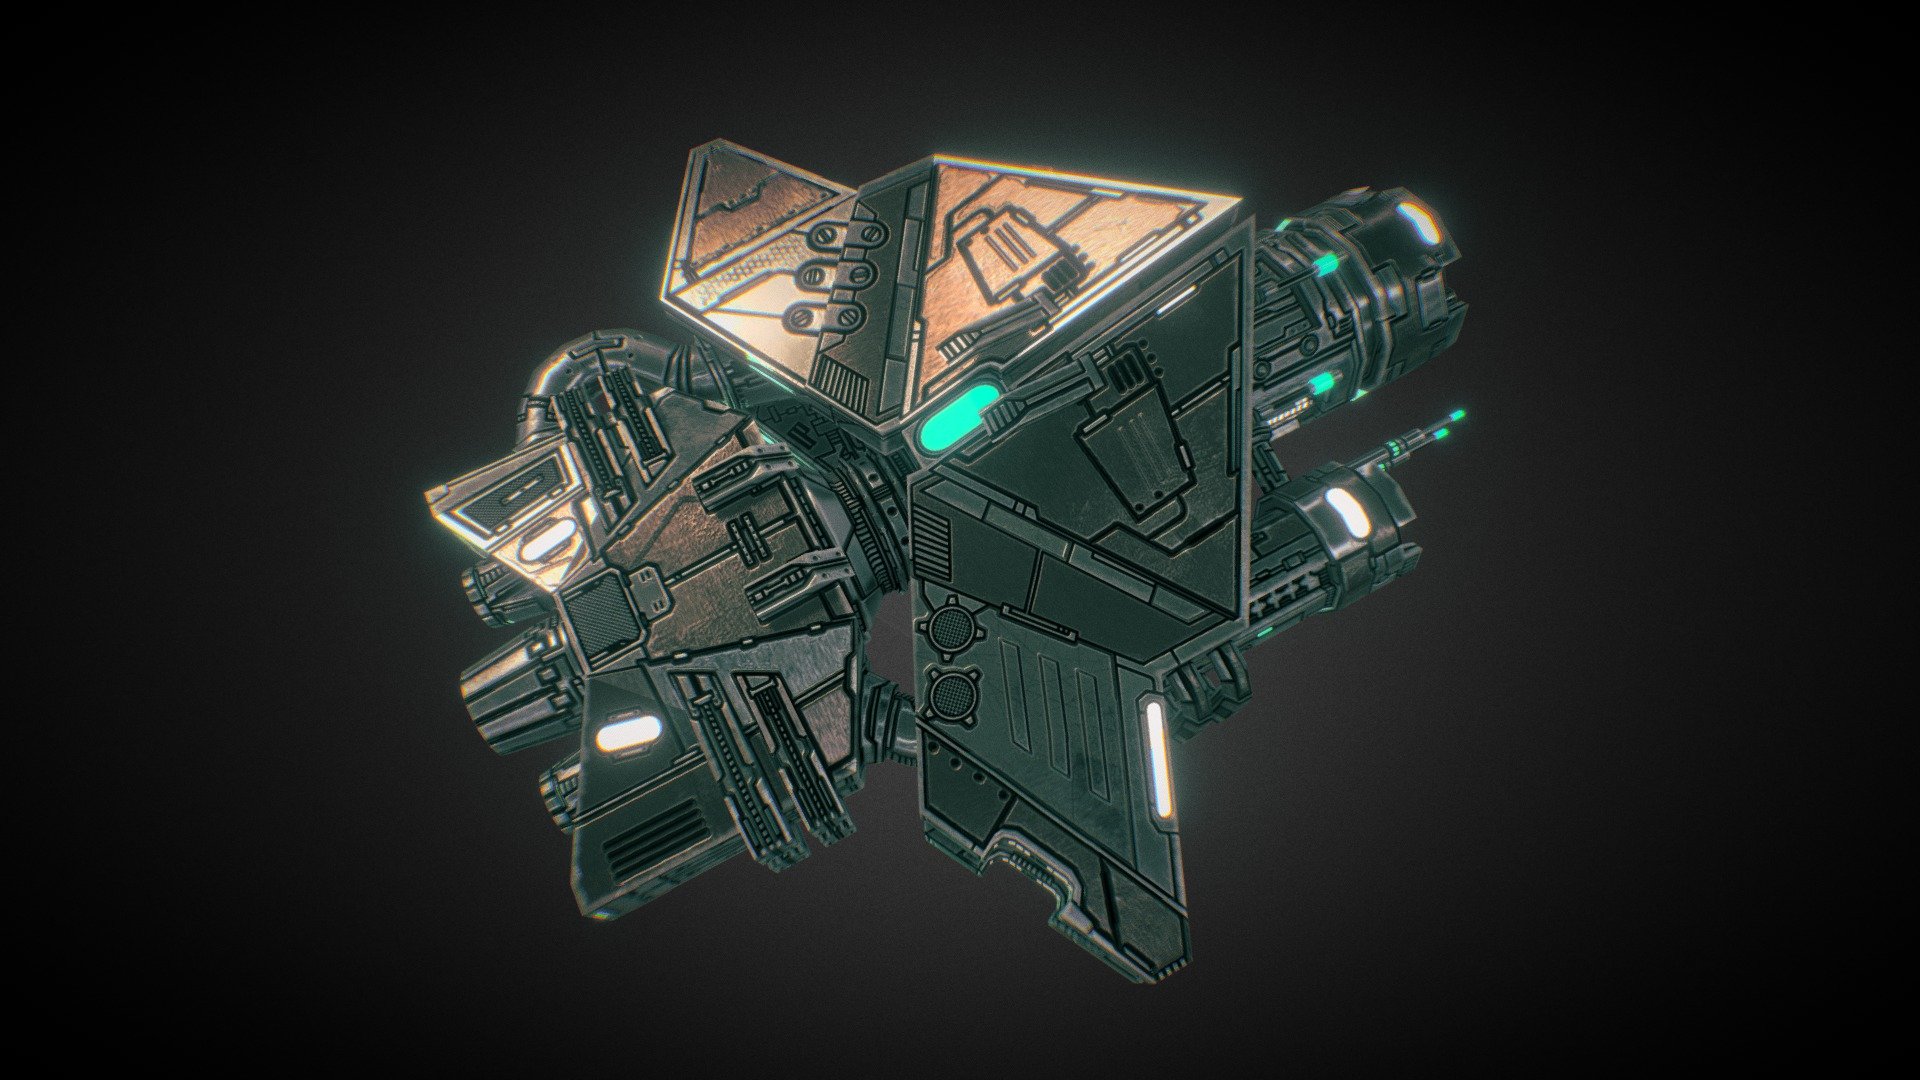 In-game model of a small spaceship belonging to the Deprived faction.
Learn more about the game at http://starfalltactics.com/ - Starfall Tactics — Medea Deprived frigate - 3D model by Snowforged Entertainment (@snowforged) 3d model